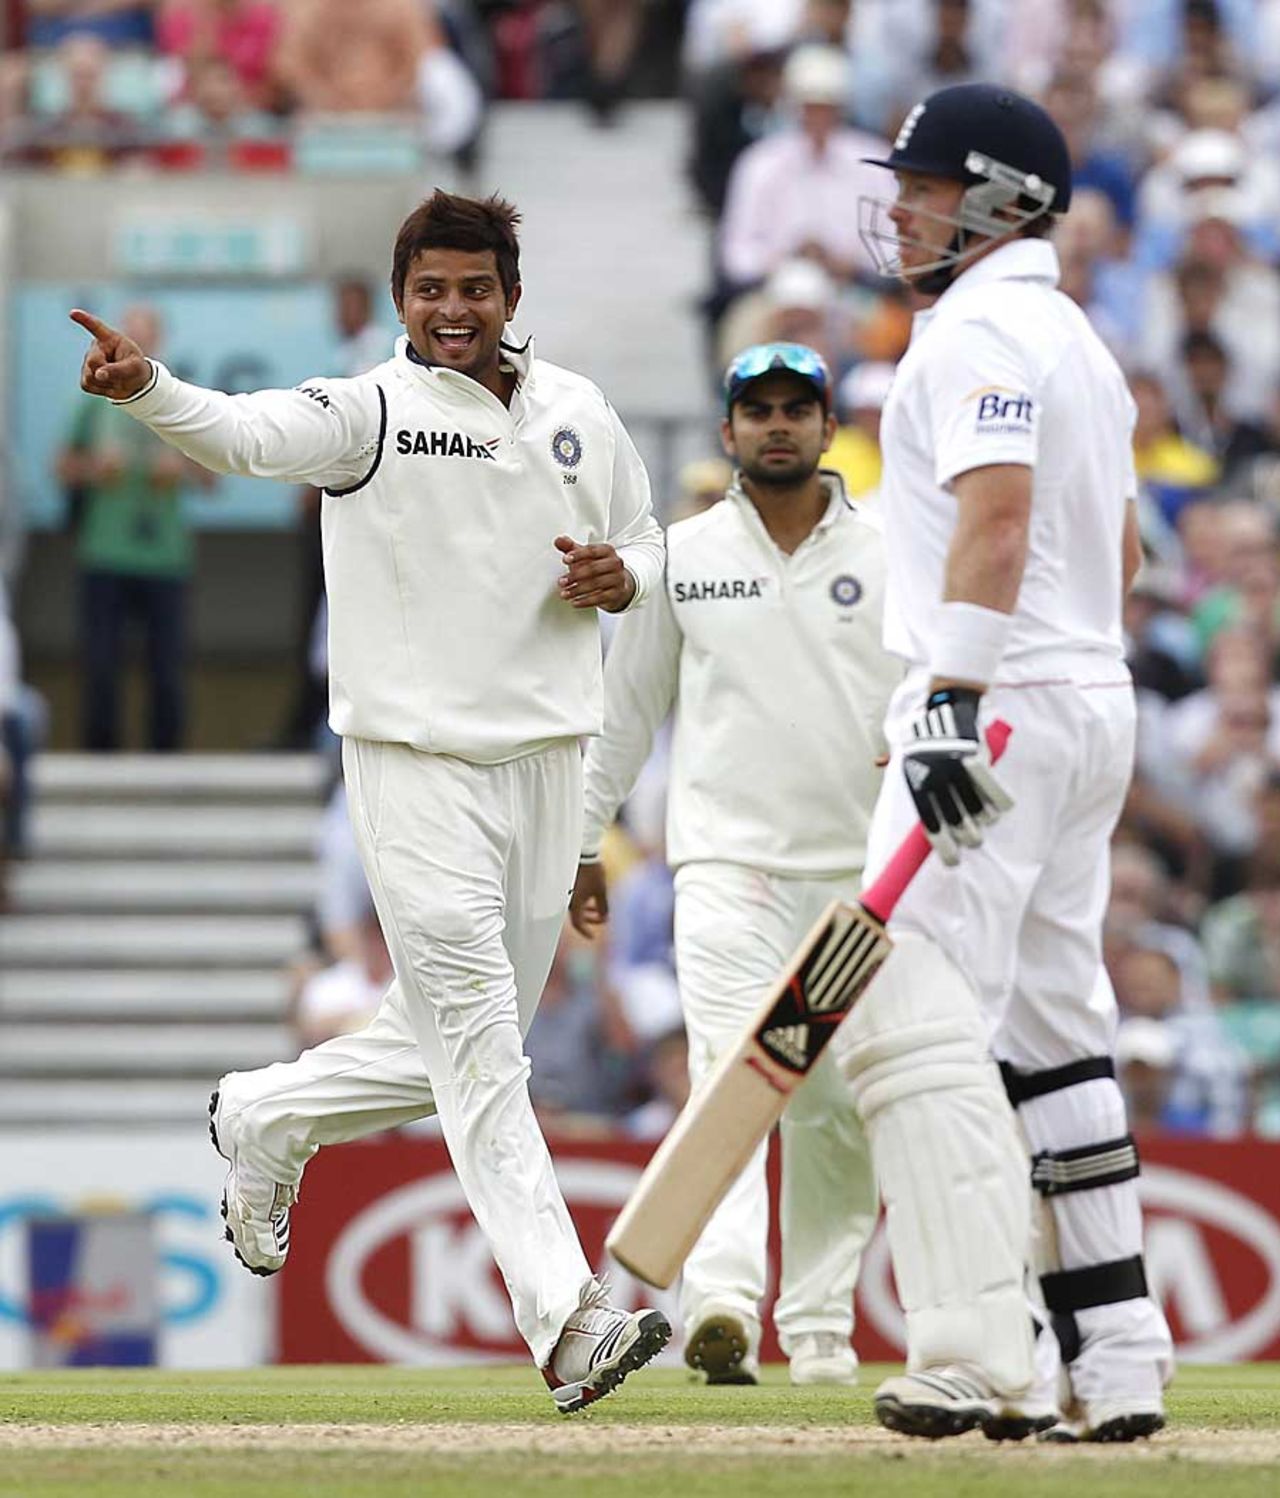 Suresh Raina trapped Ian Bell in front, England v India, 4th Test, The Oval, 3rd day, August 20, 2011